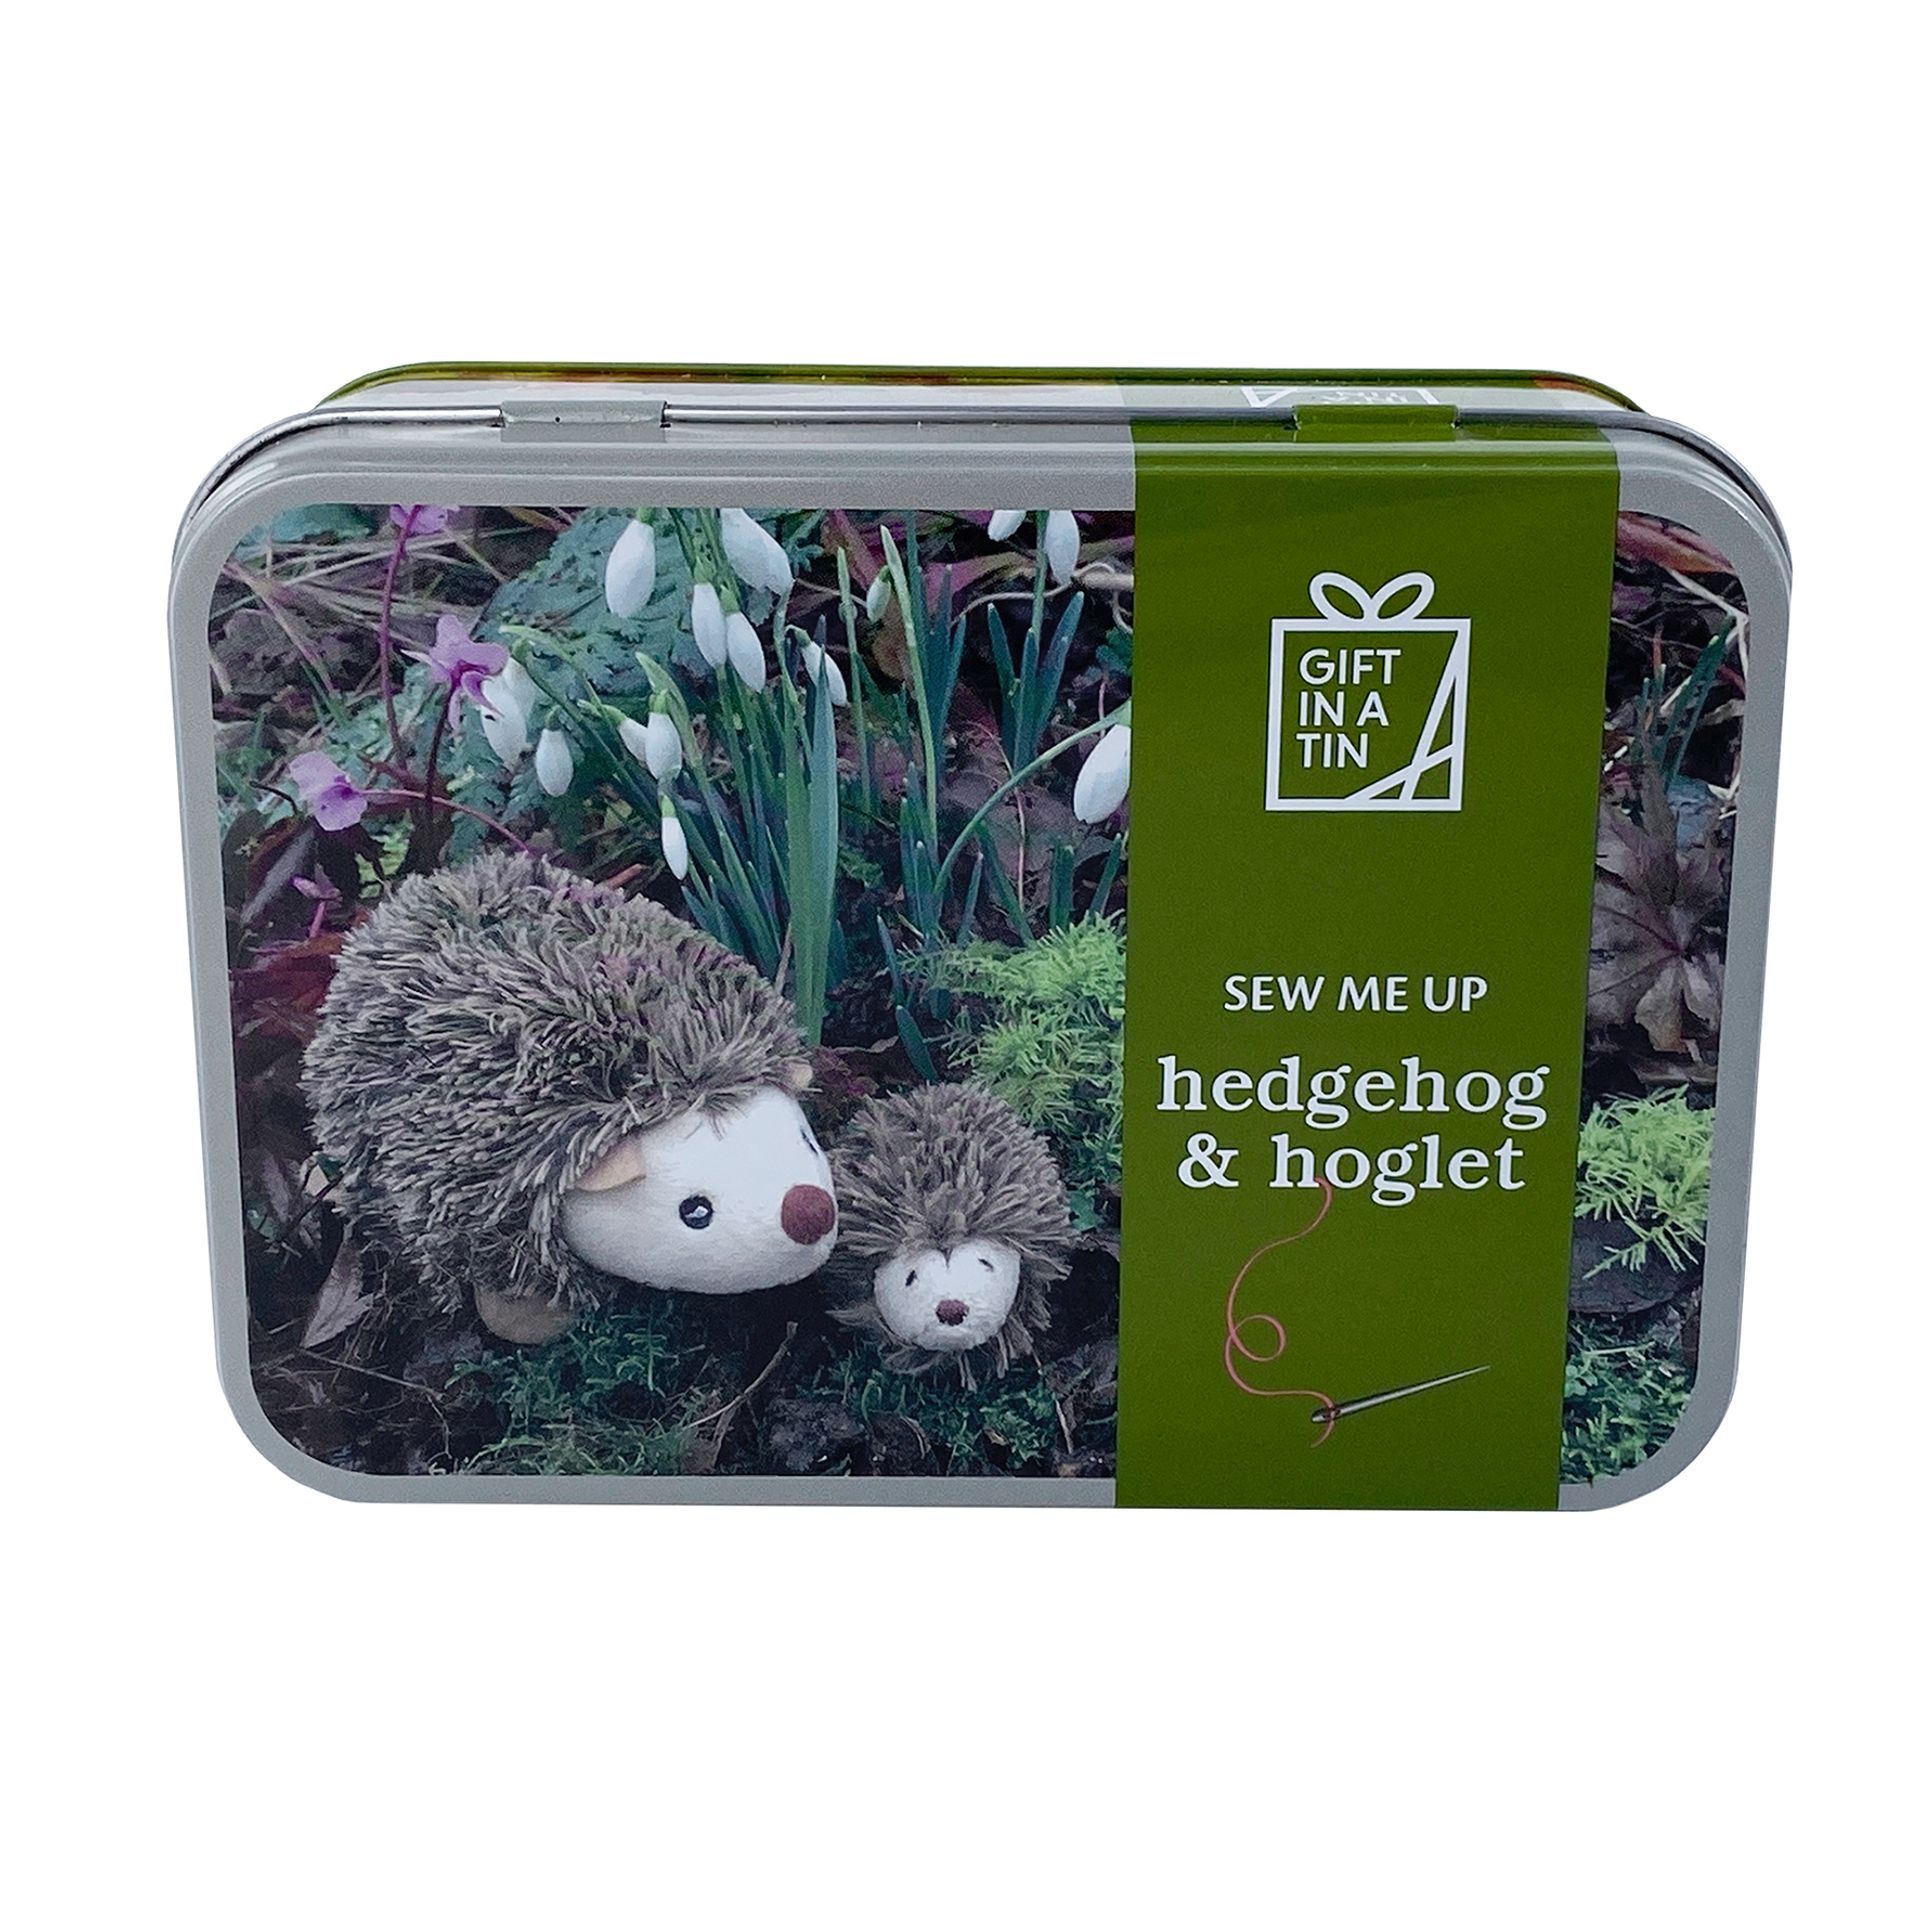 Apples to Pears Hedgehog and Hoglet Sewing Kit